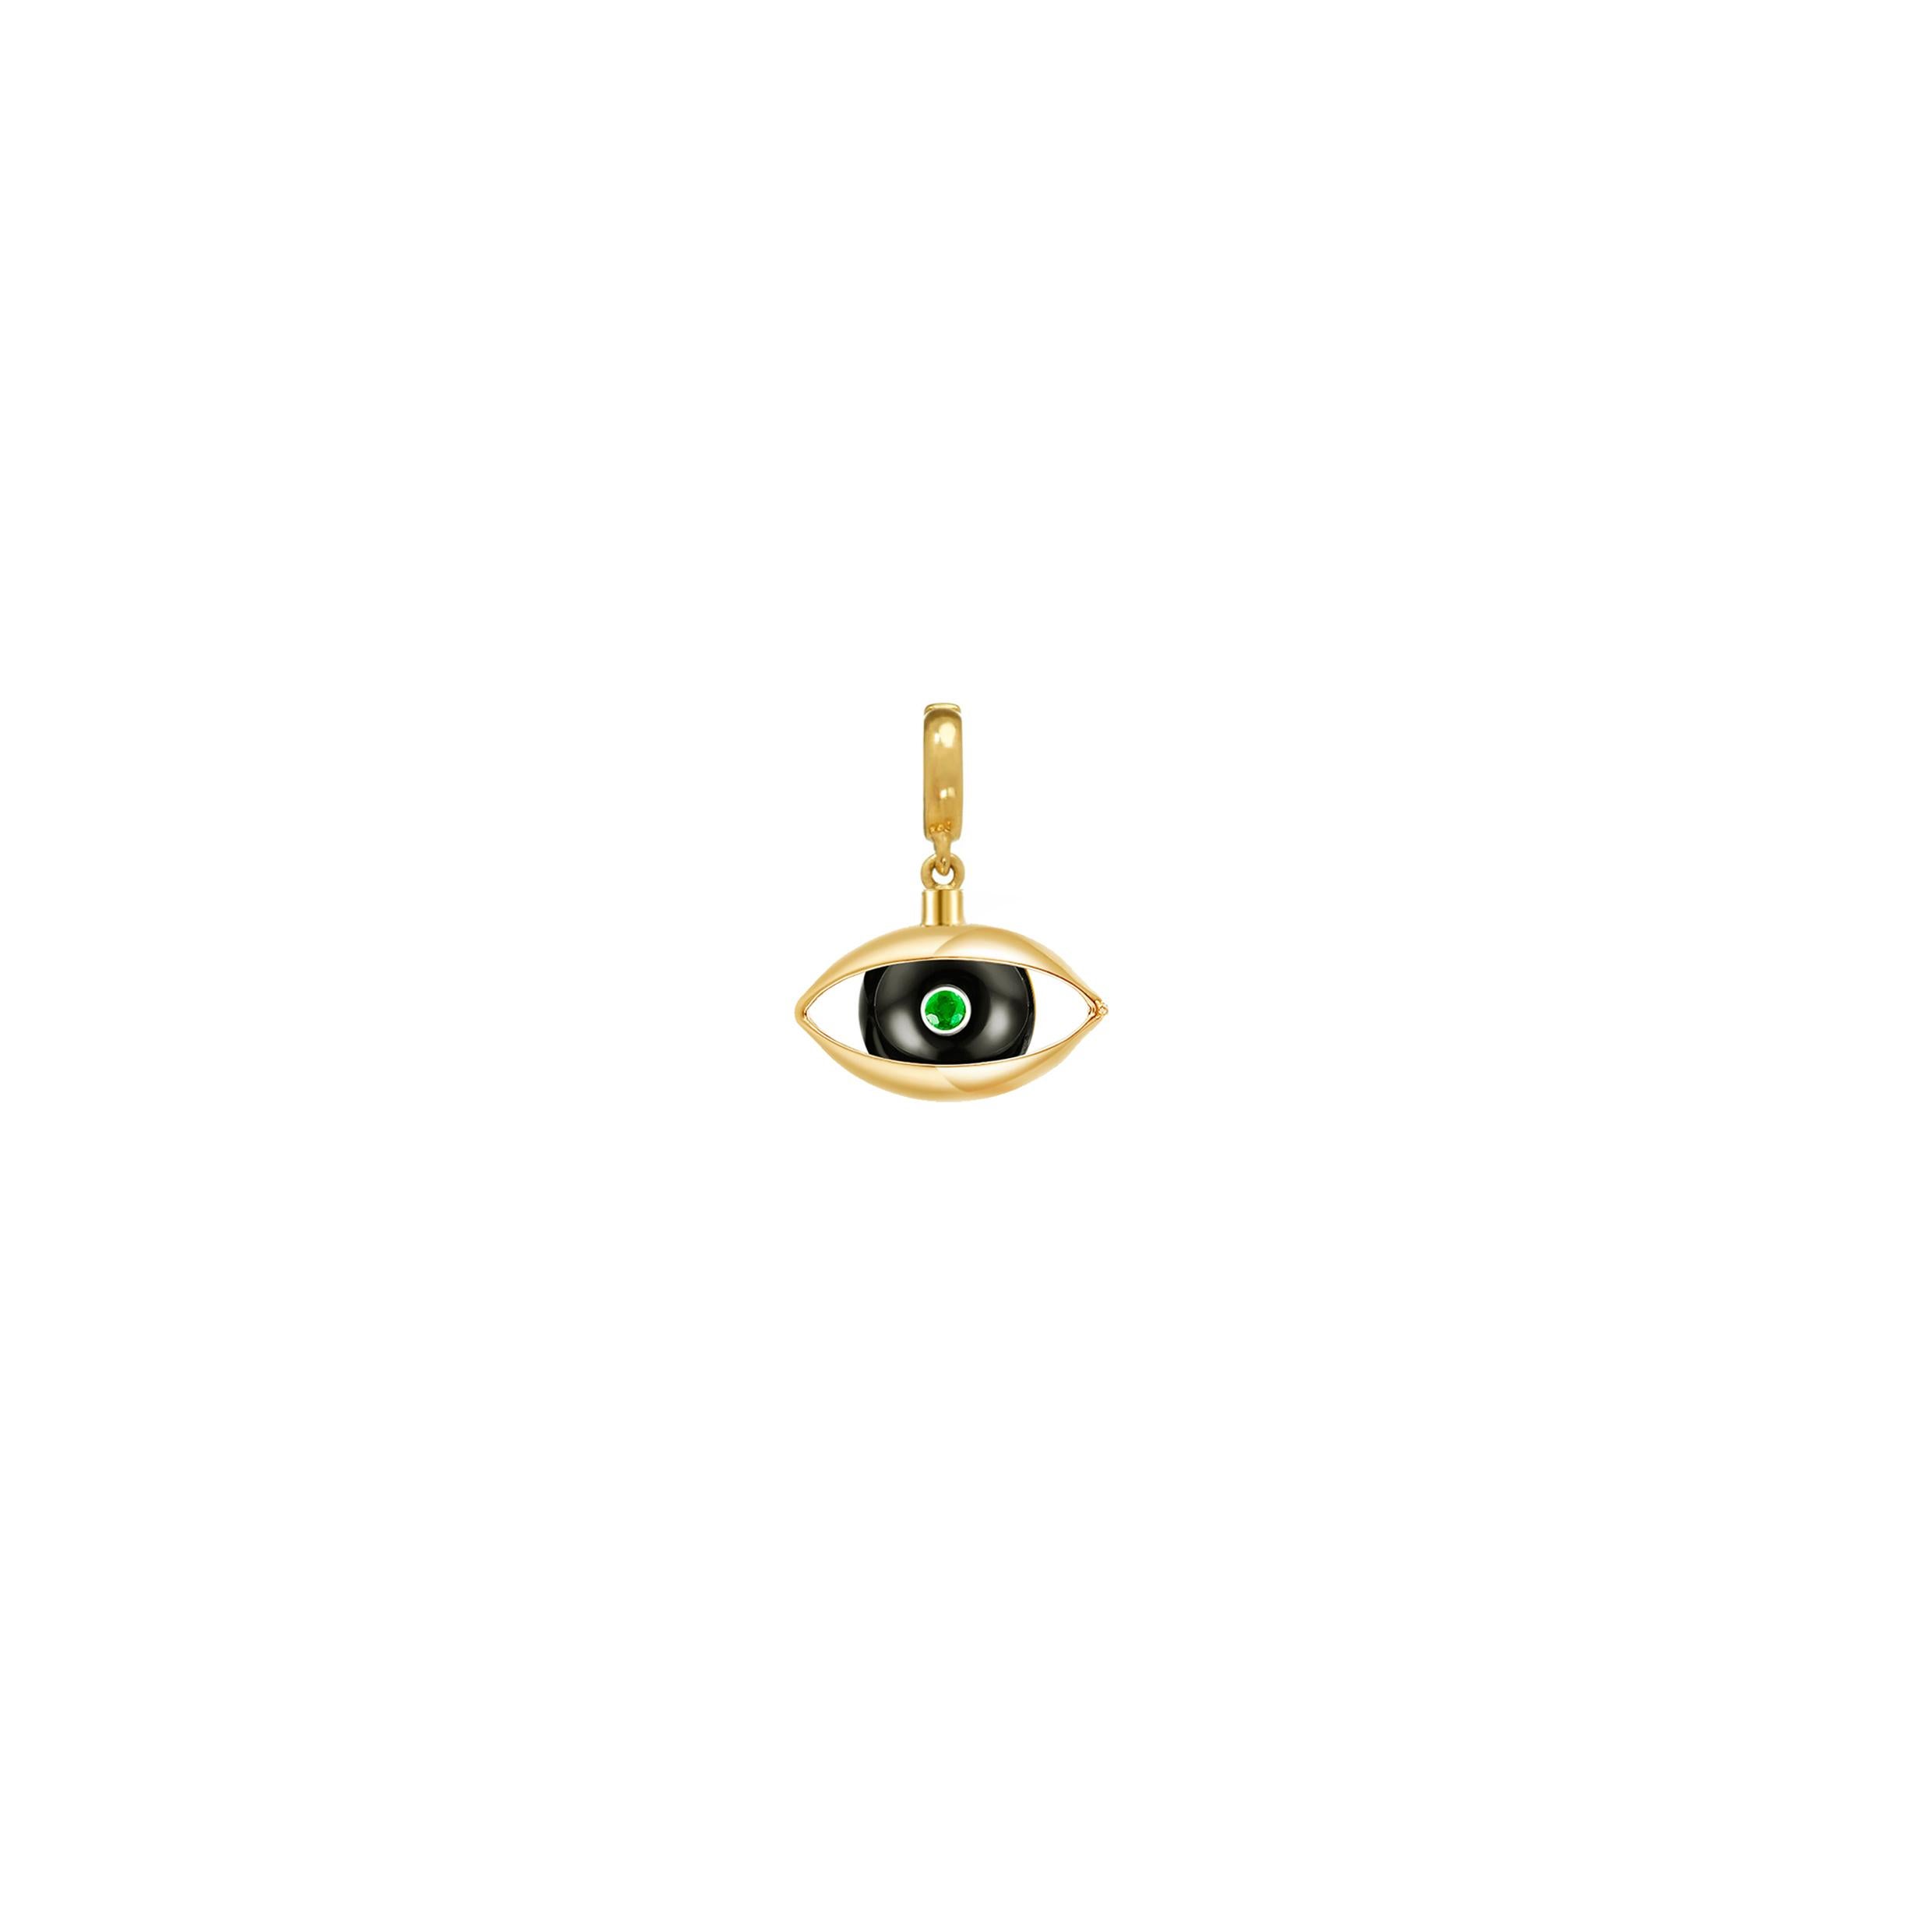 Details: 18 karat yellow gold, Akoya Pearl, ruby, diamond
H:1cm, W:1.6cm

This very unique eye charm from our signature Eye collection, it's a perfect everyday talisman, elegant and stylish. 

The Eye pieces are enchantingly joyful as well as